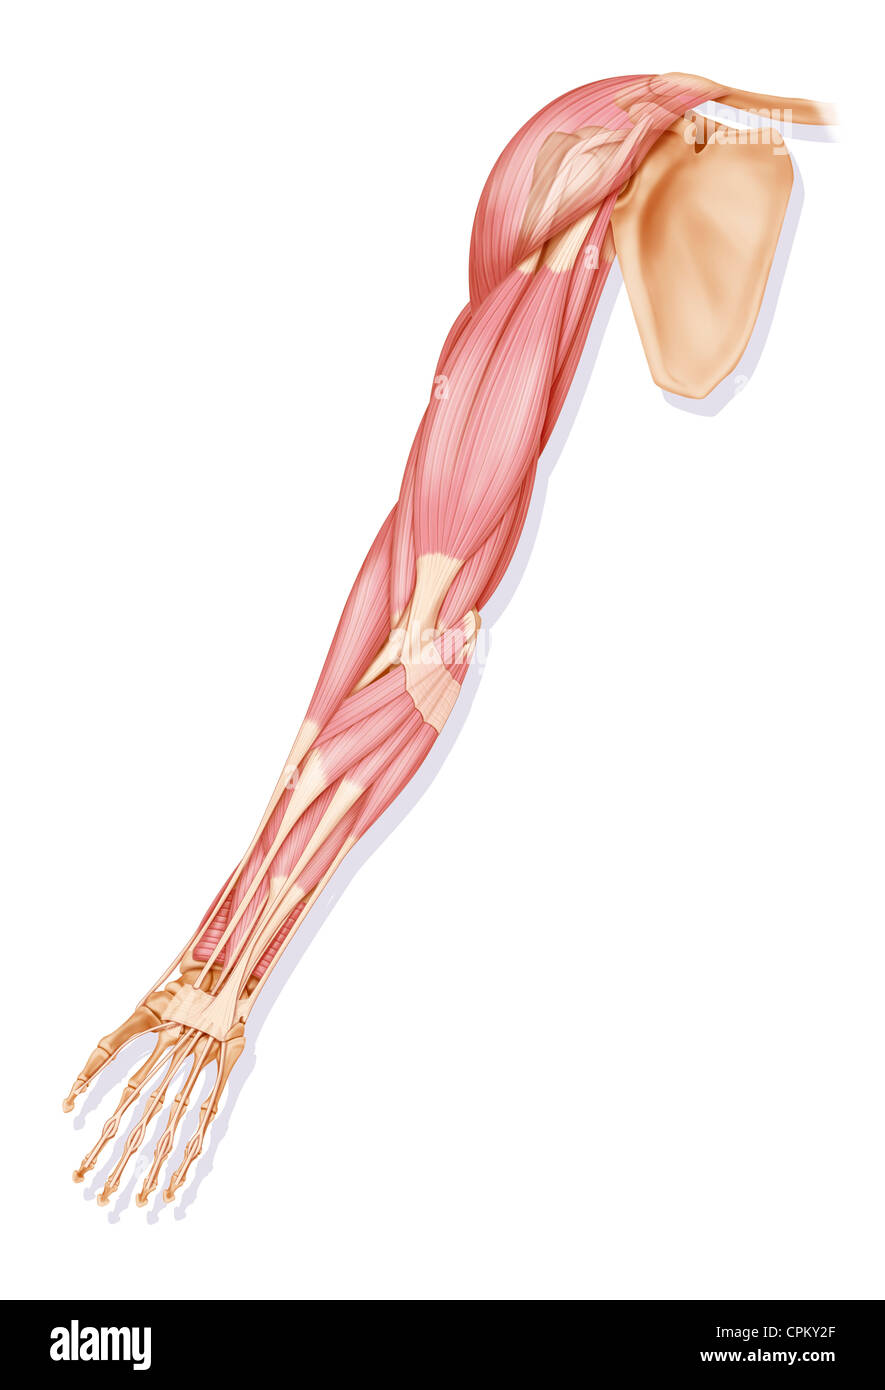 Human Arms Anatomy Diagram Showing Bones And Muscles While Flex Stock